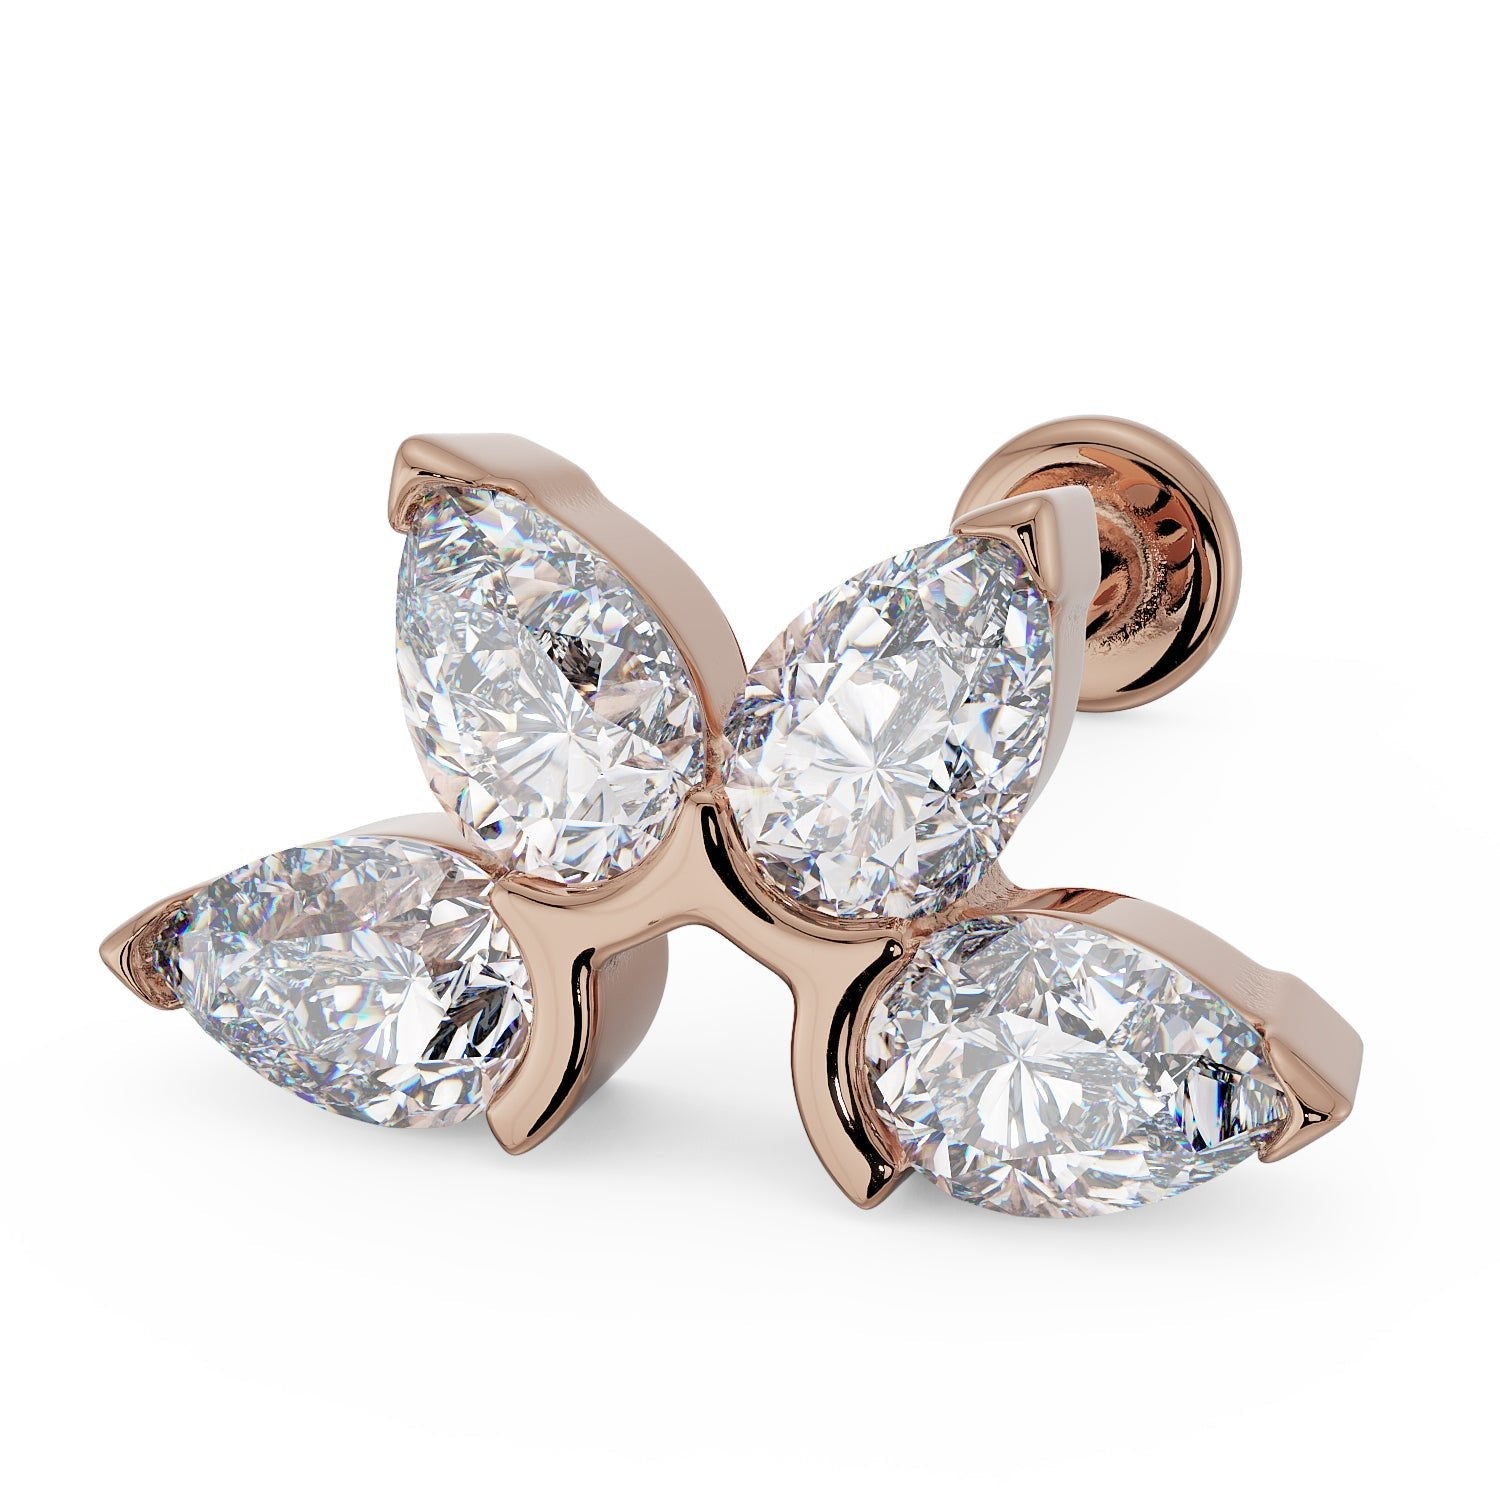 4 Pear Cubic Zirconia Flat Back Stud Nose Lip Cartilage Earring - Rose Gold